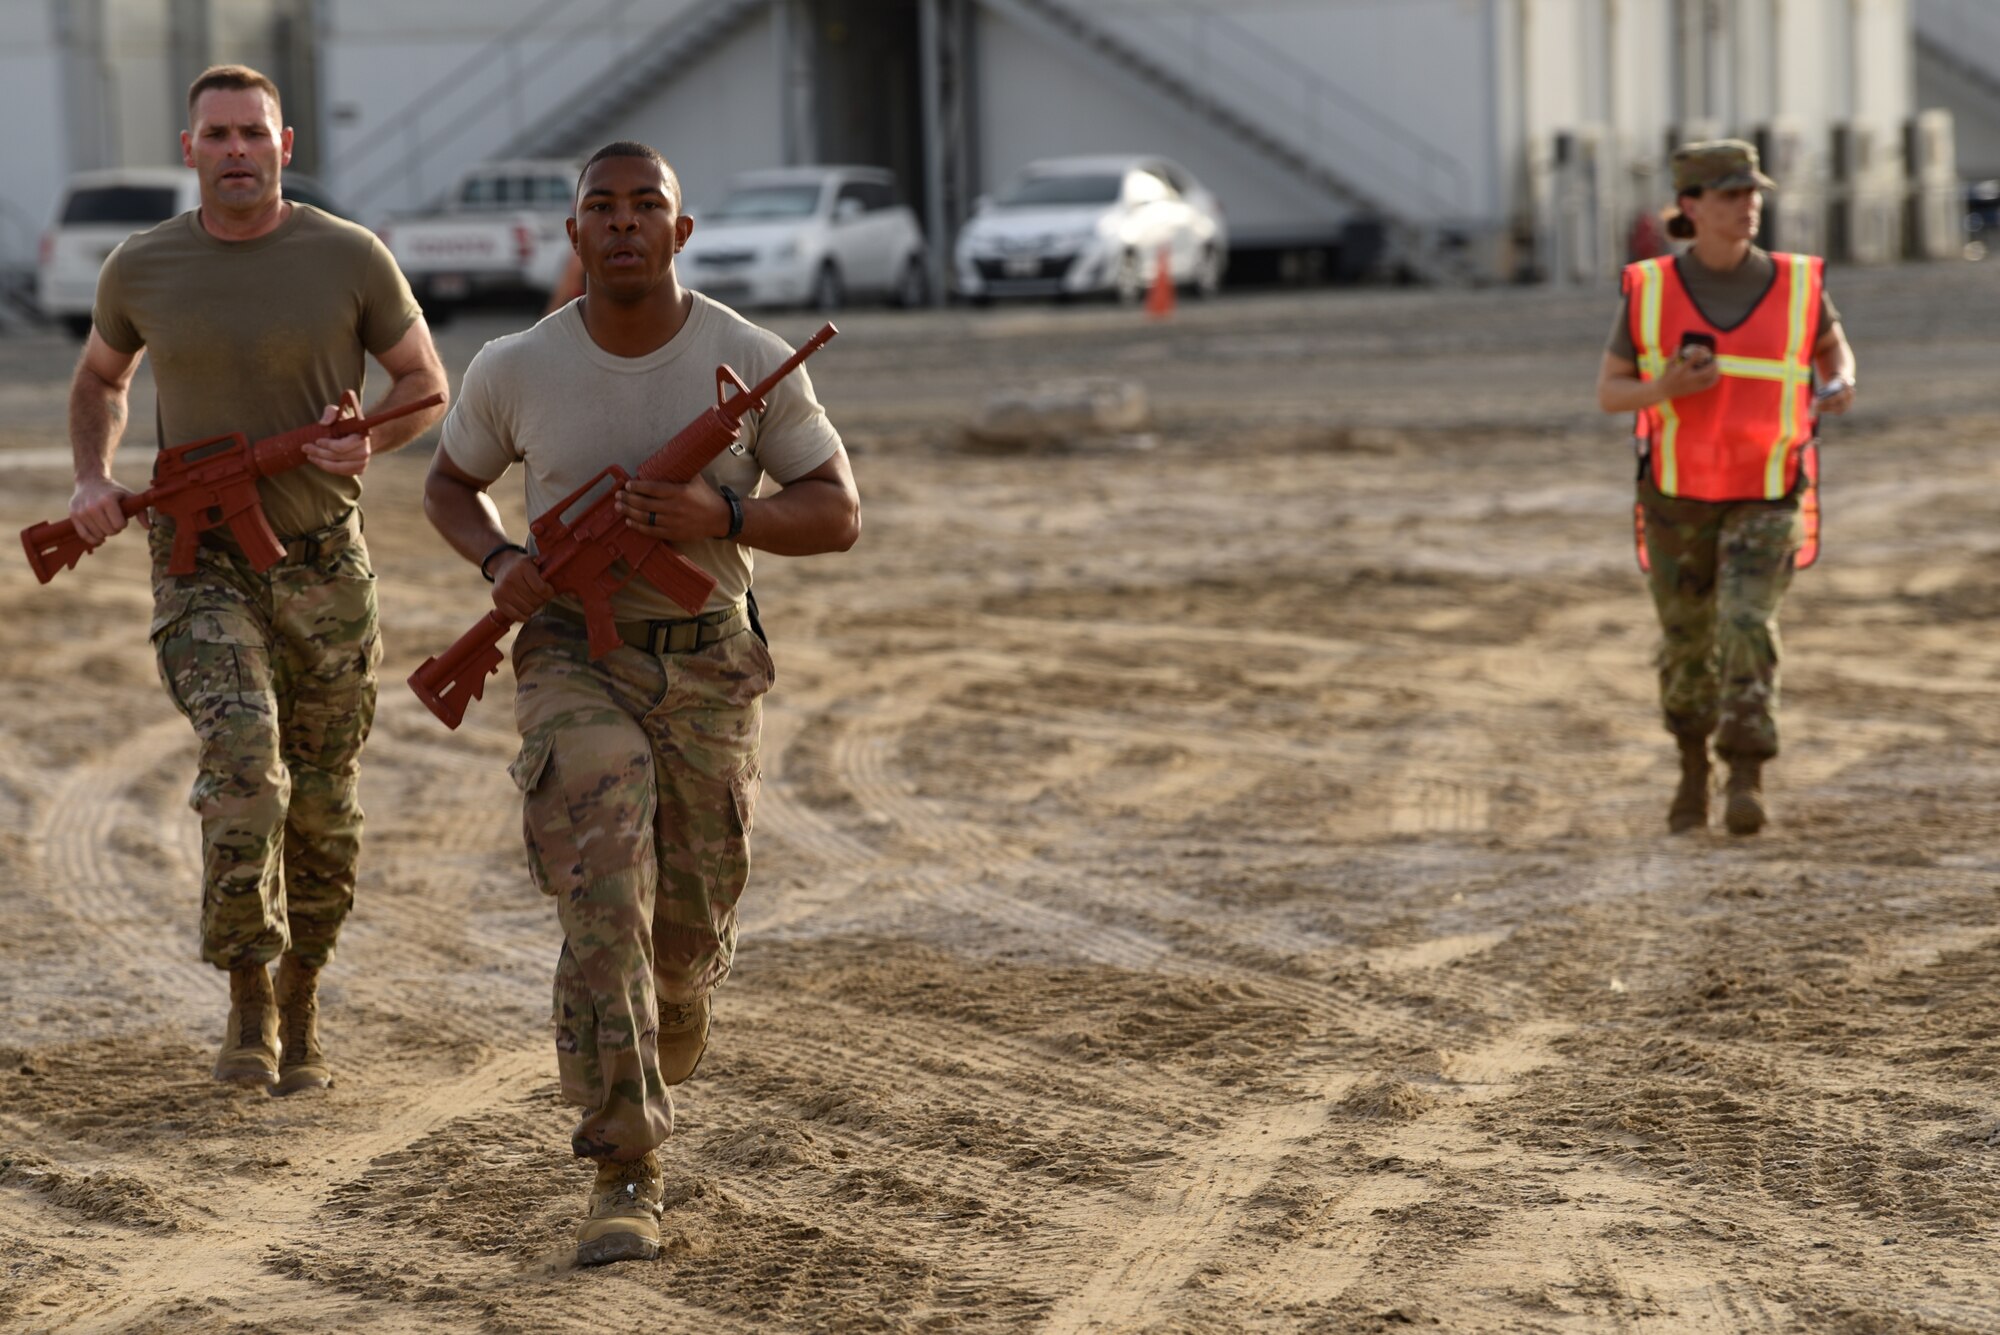 A security forces fire team run their last lap around the Police Week 2019 fire team challenge course May 12, 2019, at Al Dhafra Air Base, United Arab Emirates.